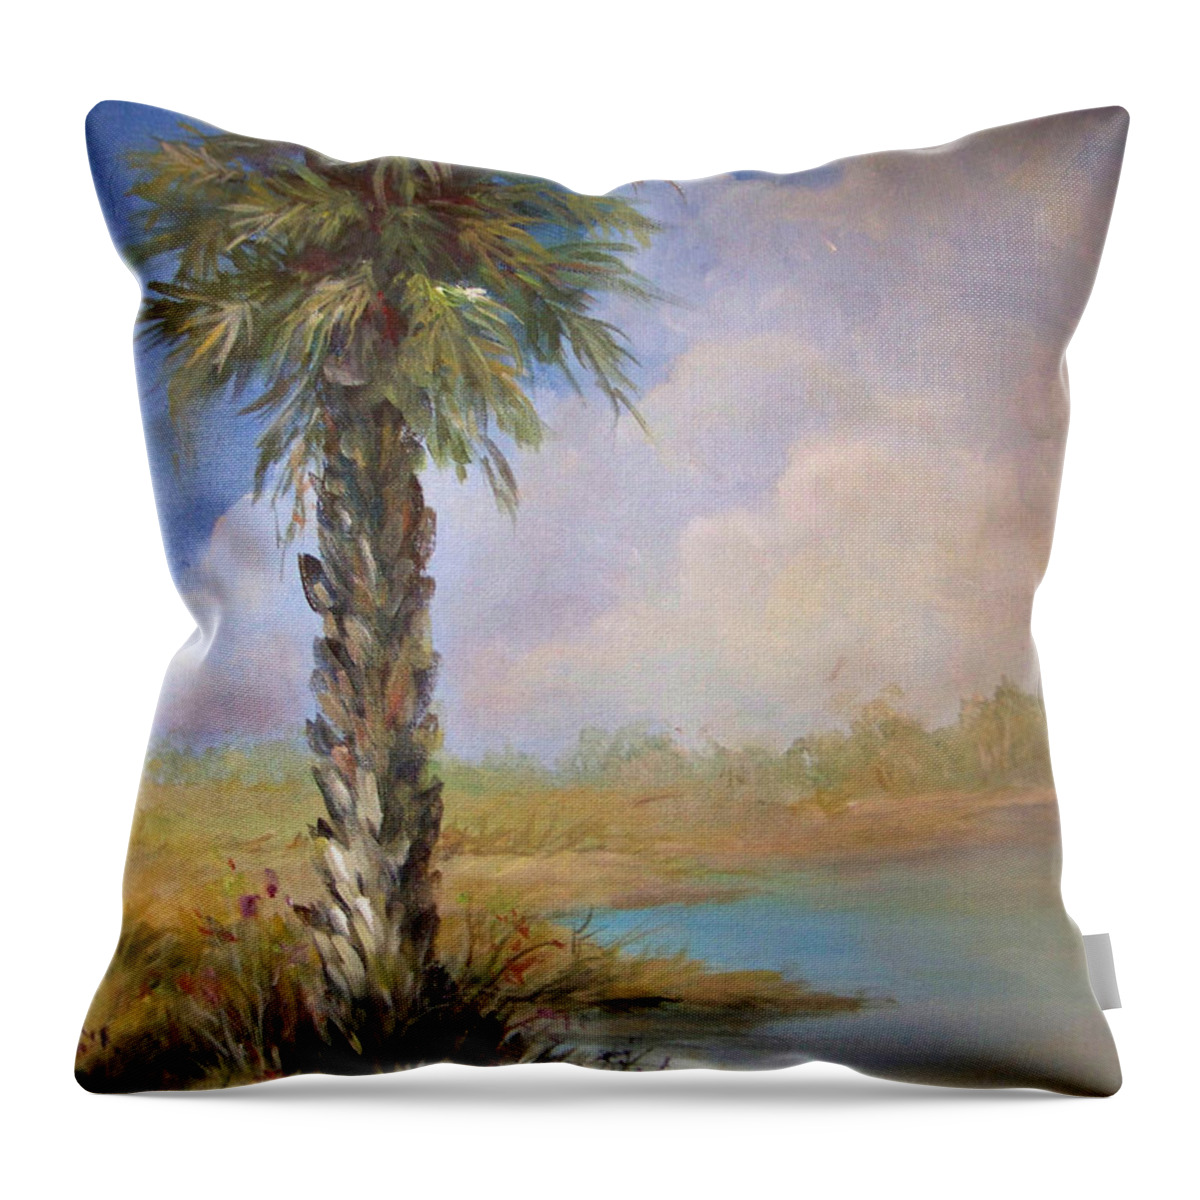 Palm Tree Throw Pillow featuring the painting Lone Palm by Deborah Smith